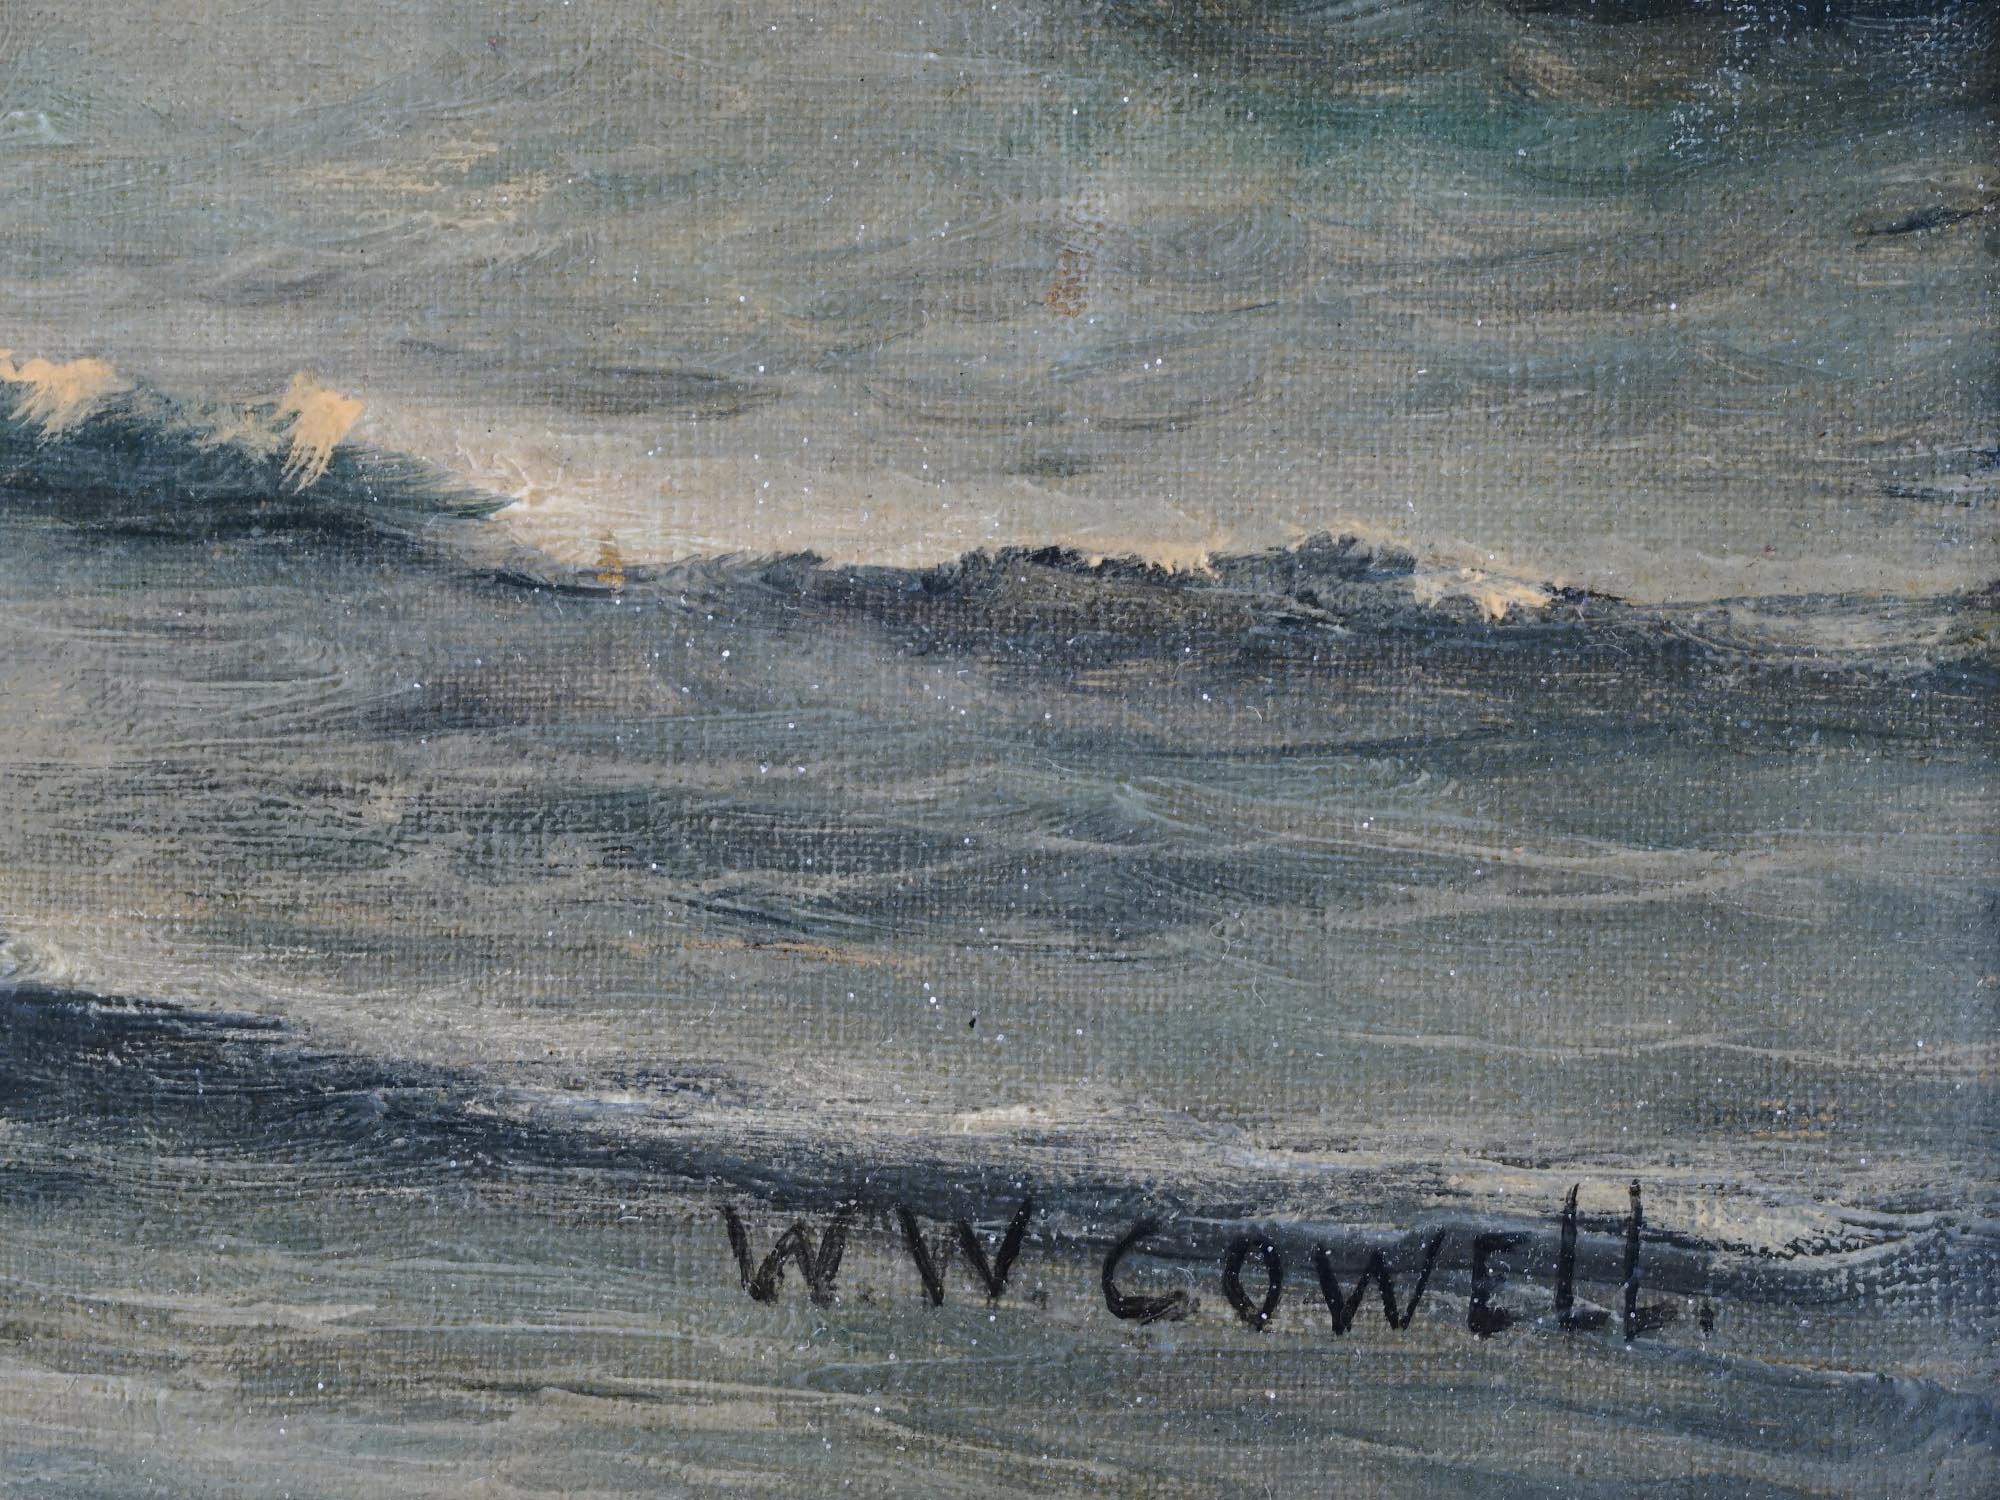 ANTIQUE MARINE PAINTING BY WILLIAM WILSON COWELL PIC-2